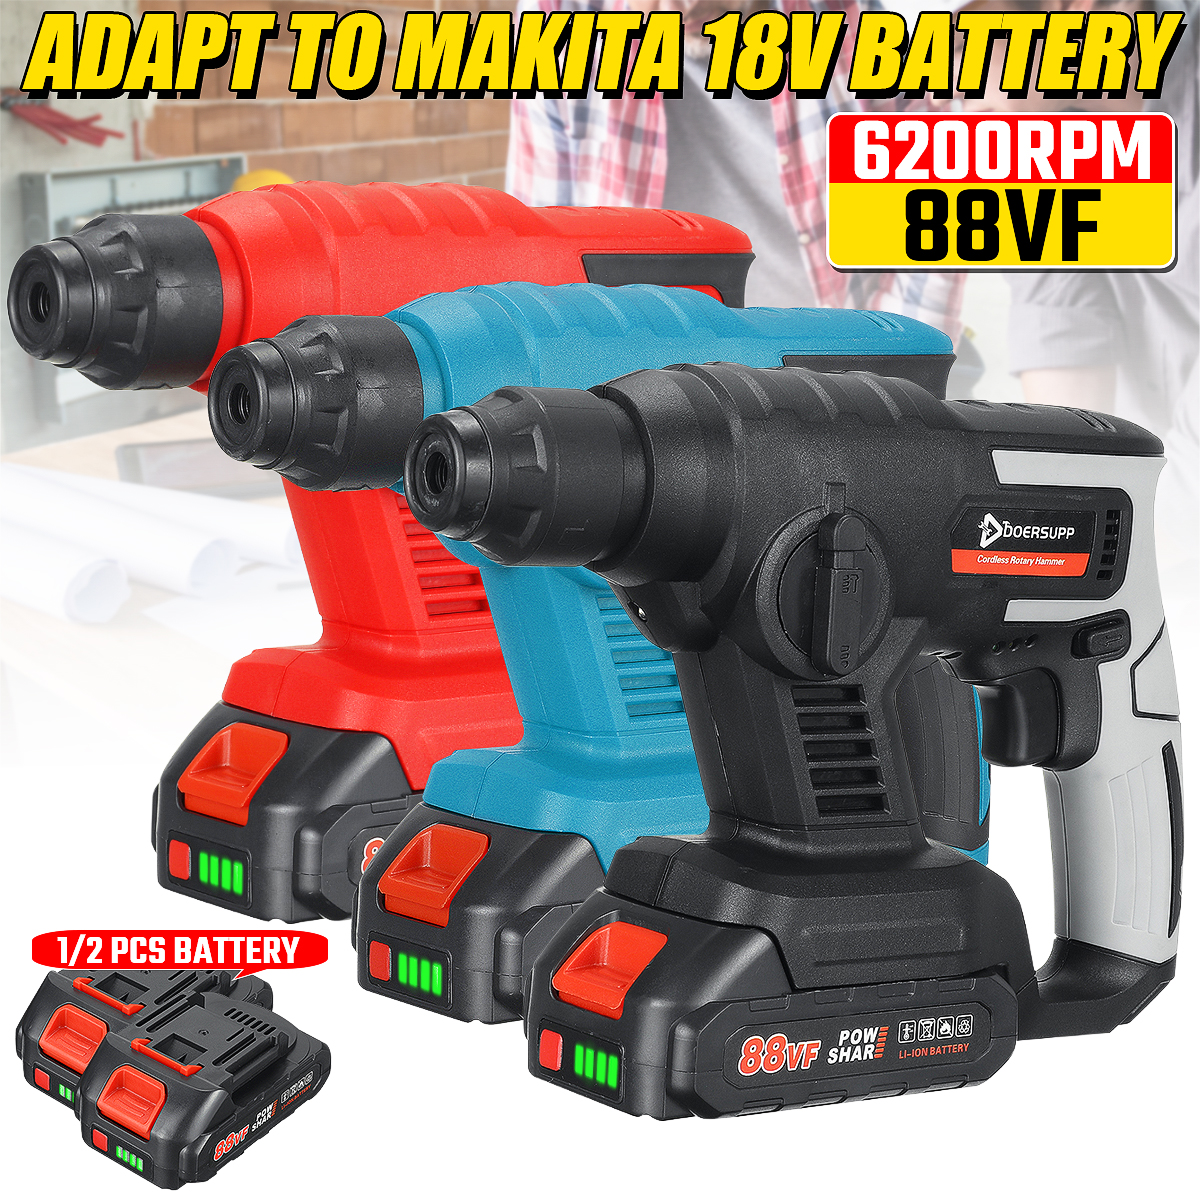 88VF-1800rpm-Cordless-Brushless-Rotary-Hammer-Drill-Fit-18VMakita-Battery-1943502-1